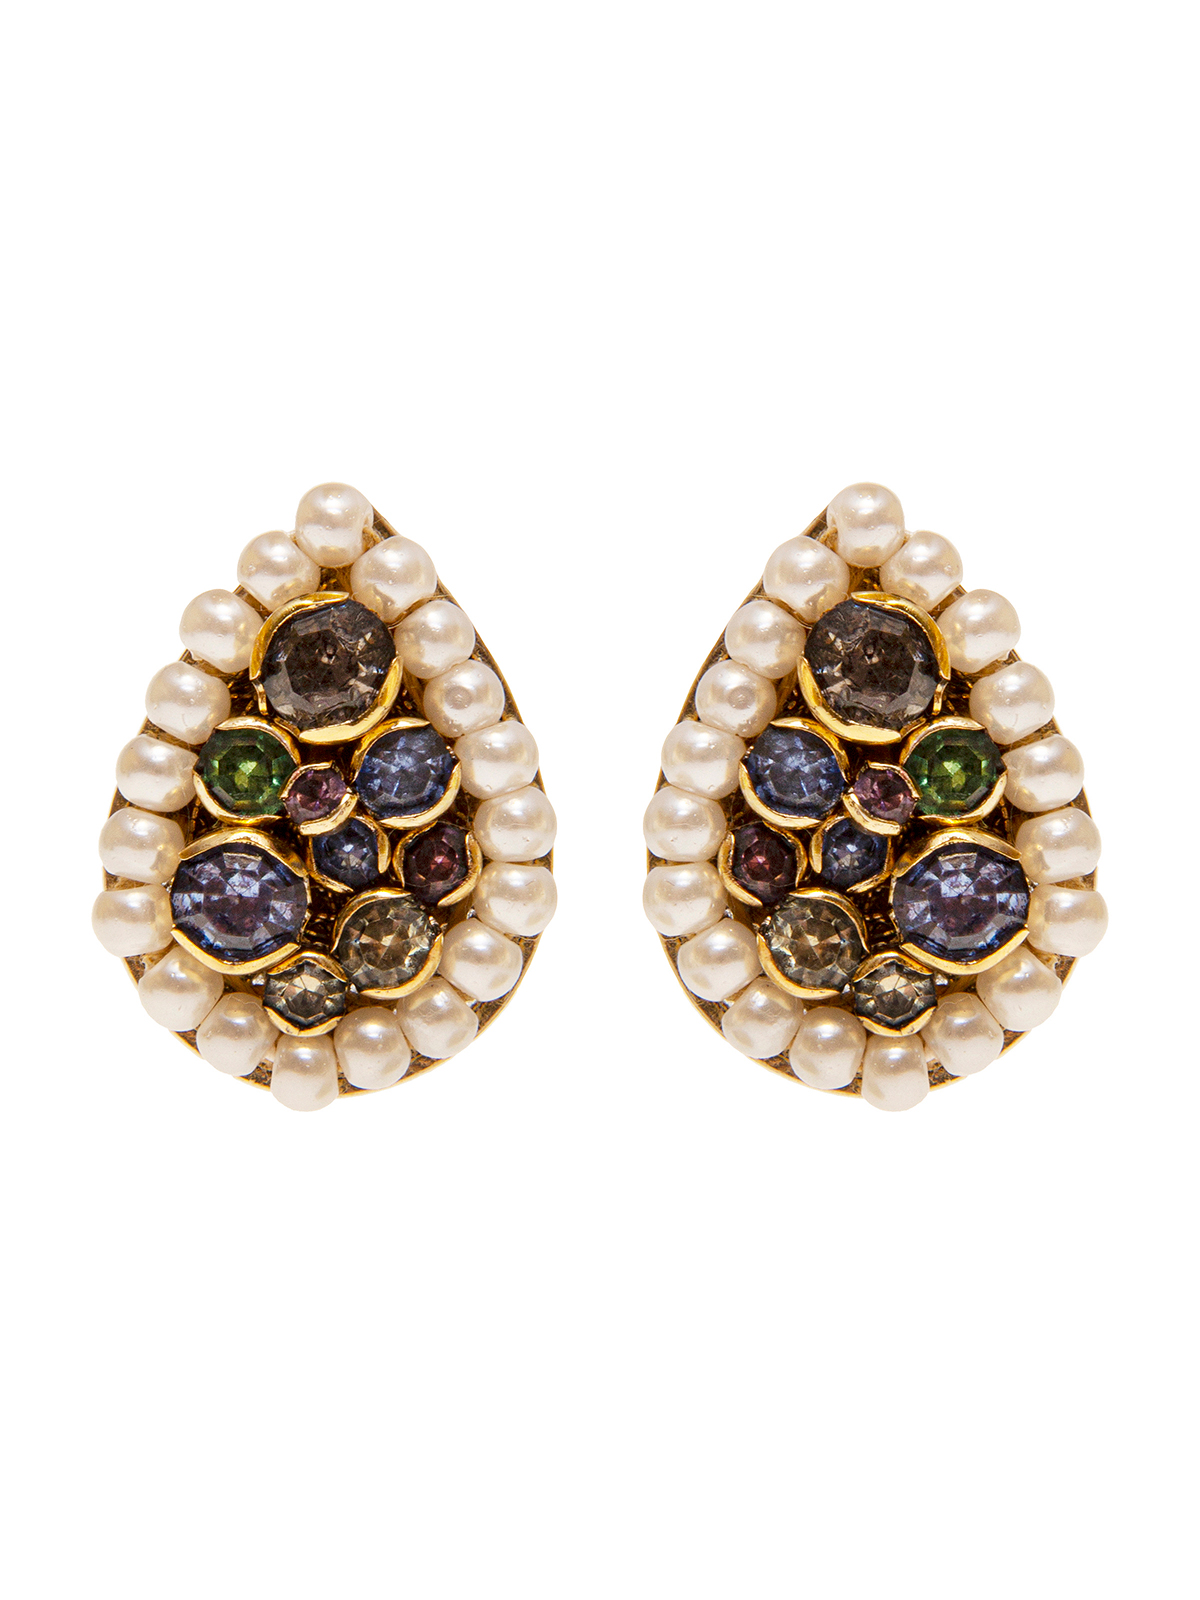 Drop earrings embellished with multicolor stones and pearls